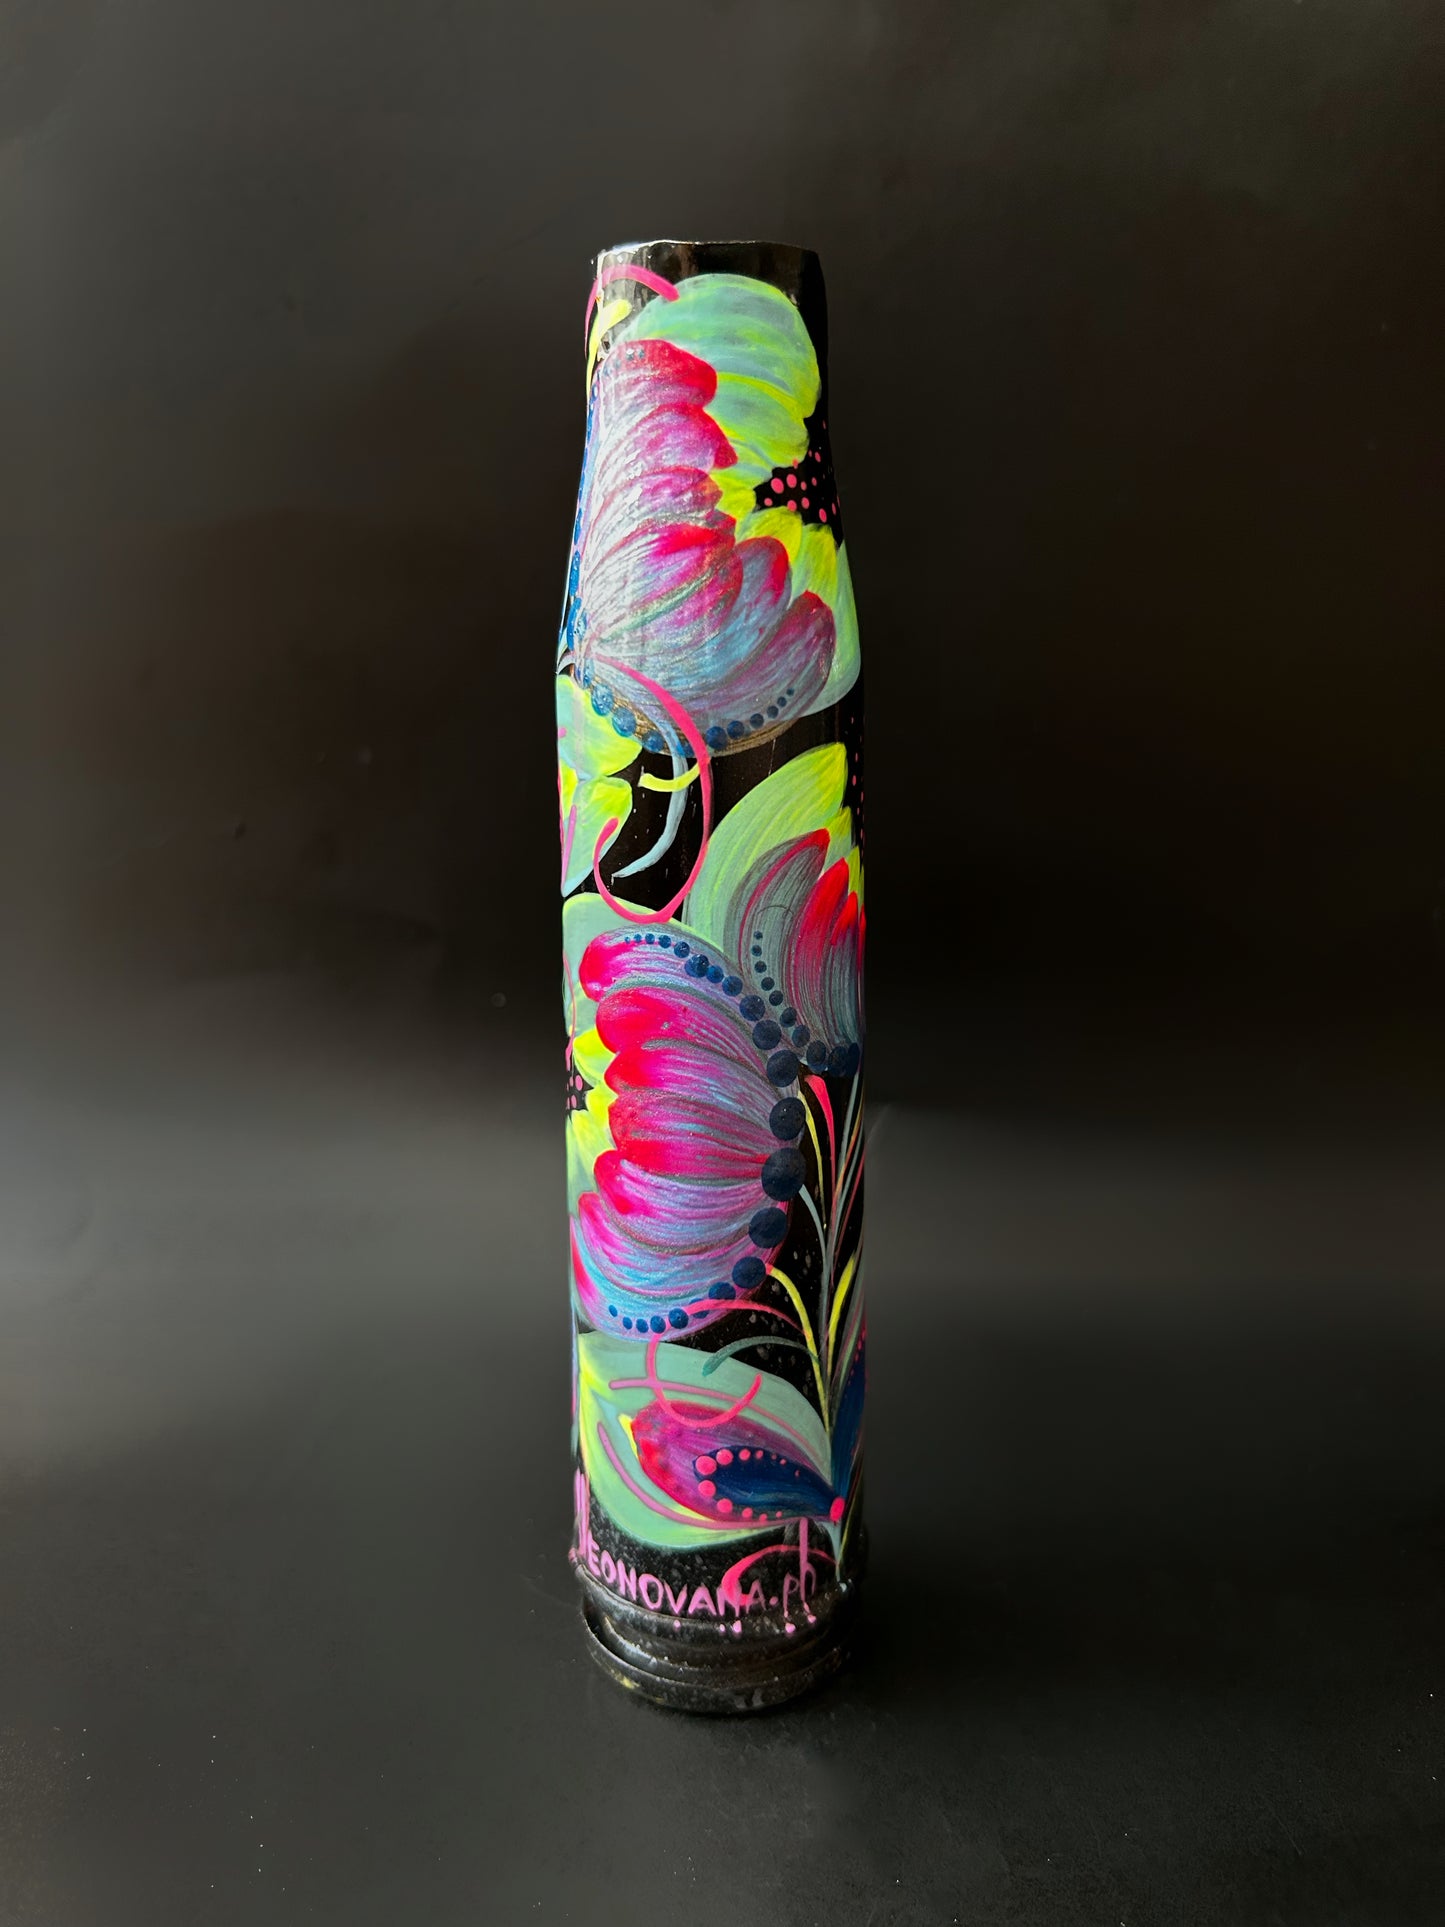 30mm shell with drawing of patterns. (#261)